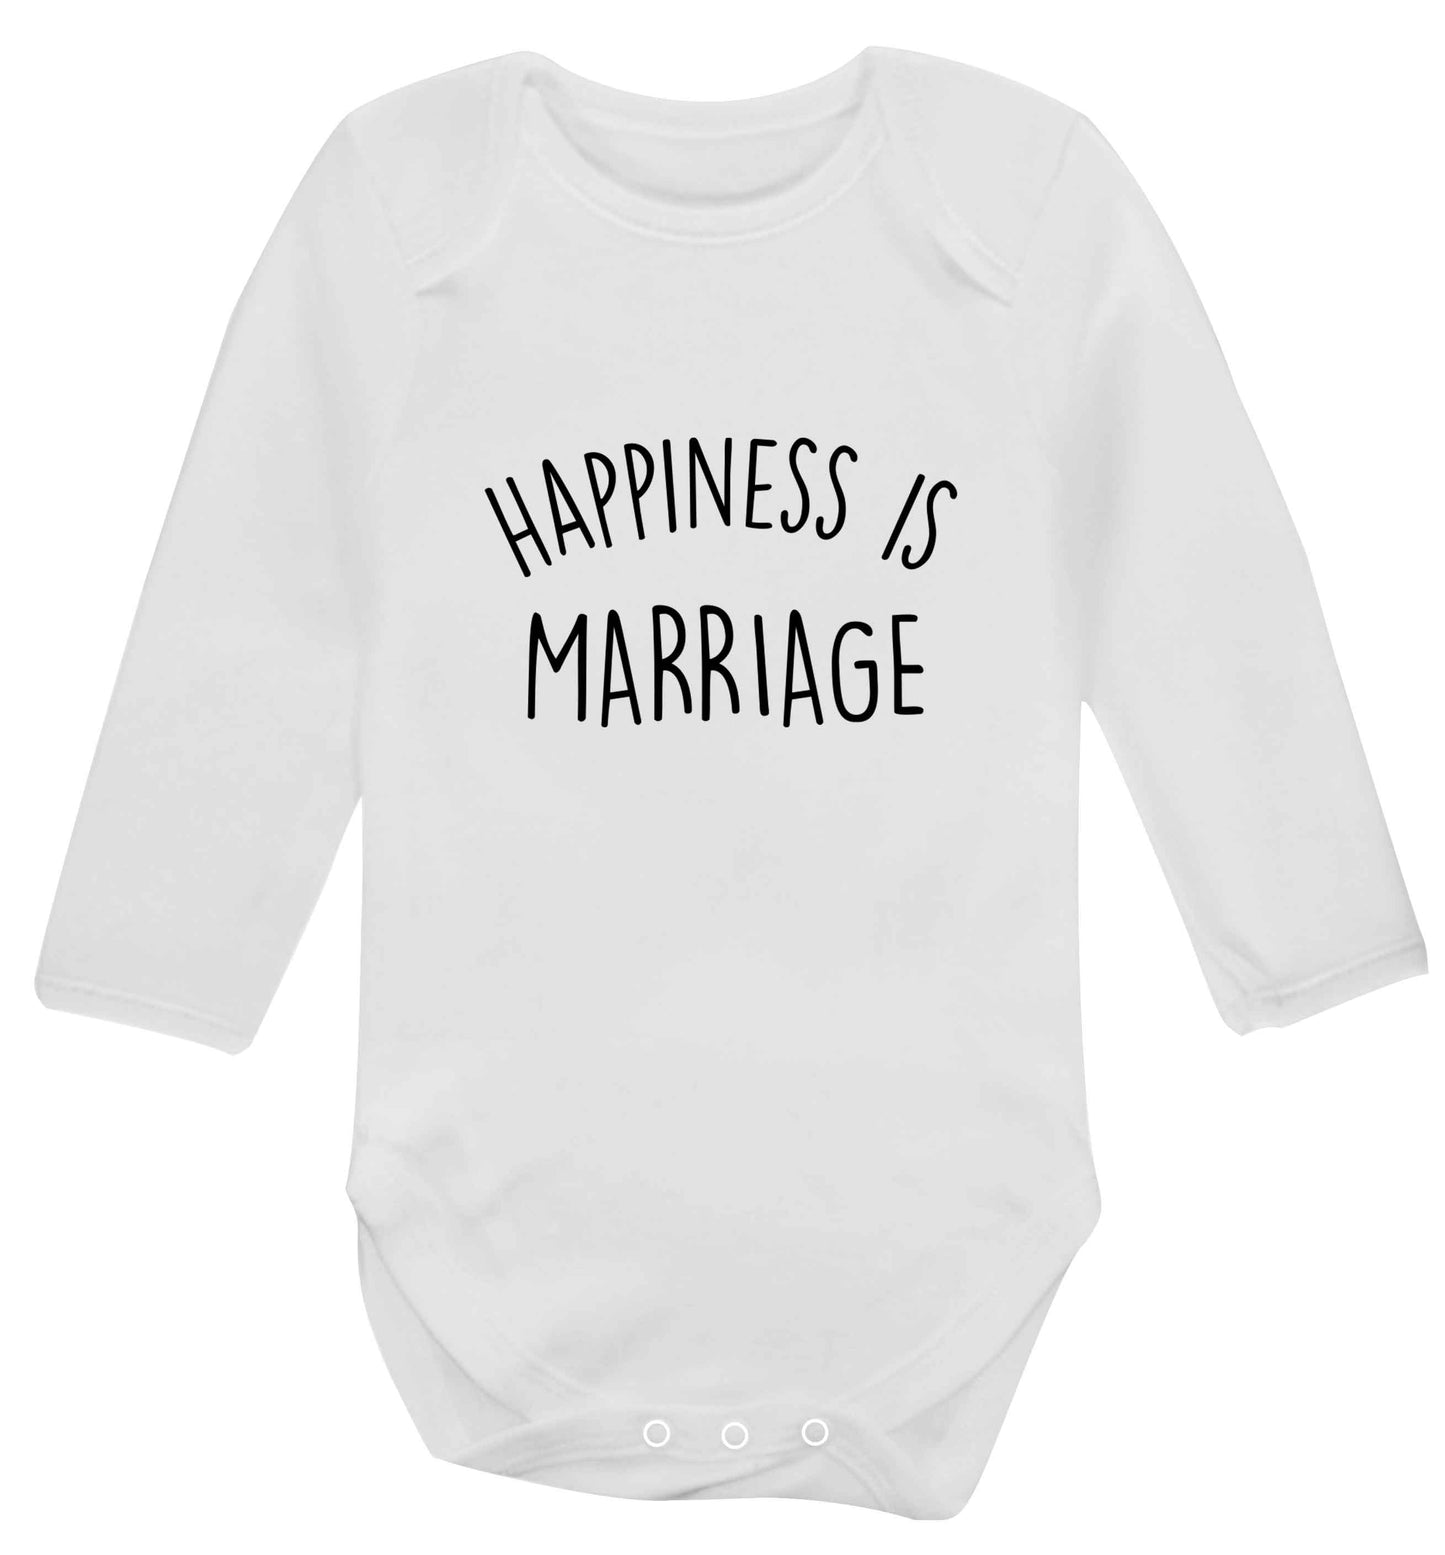 Happiness is marriage baby vest long sleeved white 6-12 months